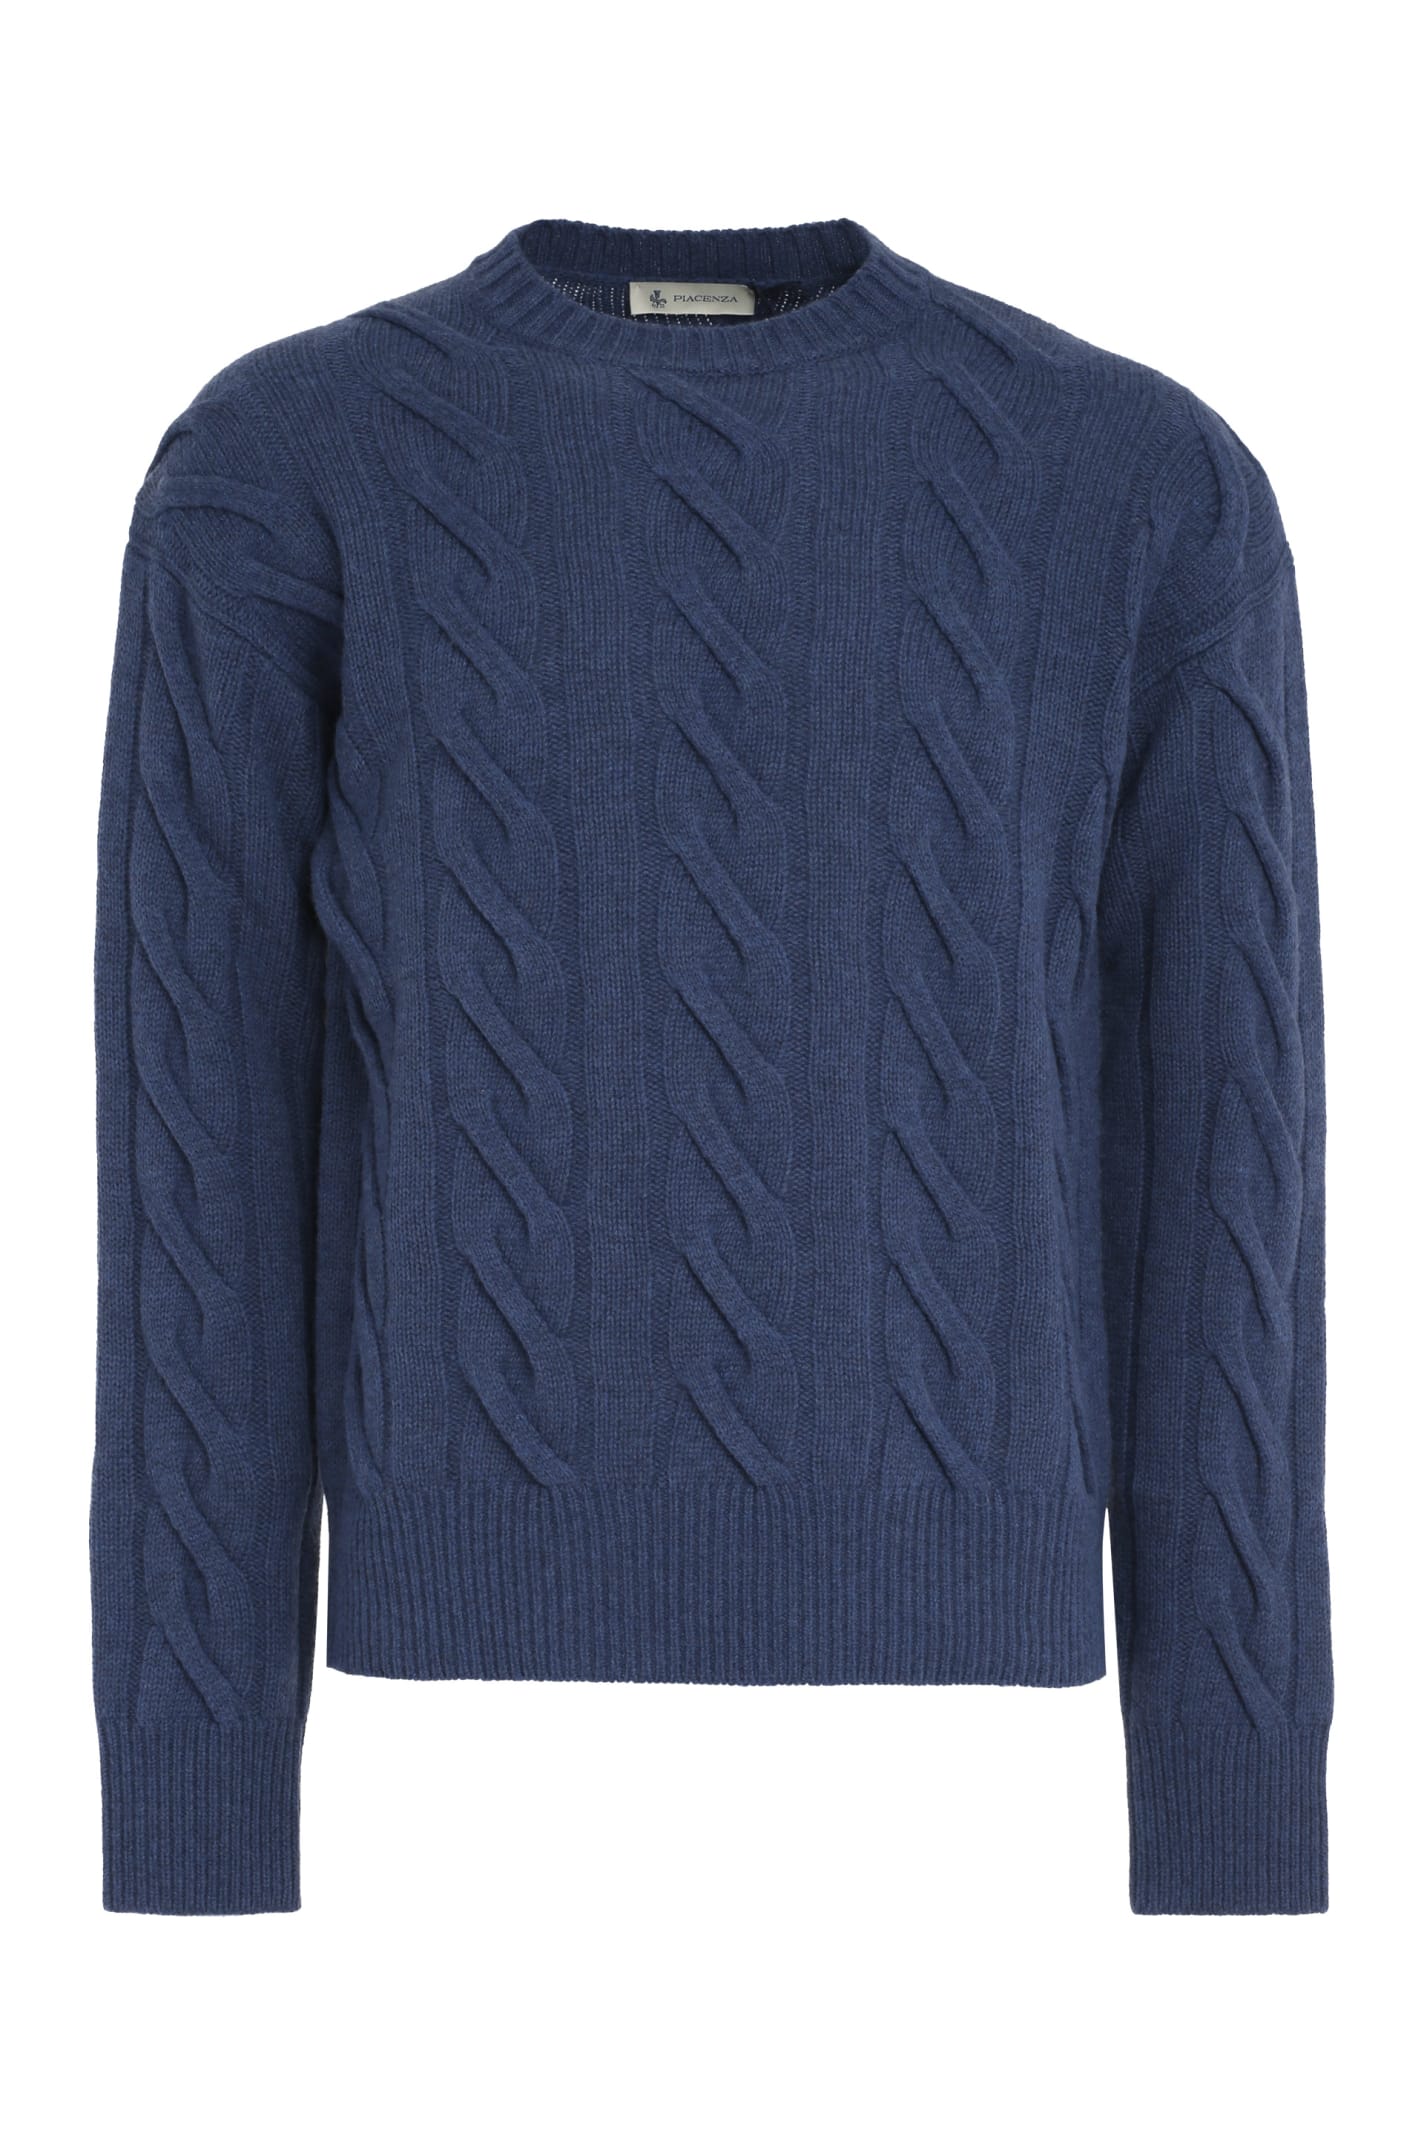 Piacenza Cashmere Cable Knit Sweater